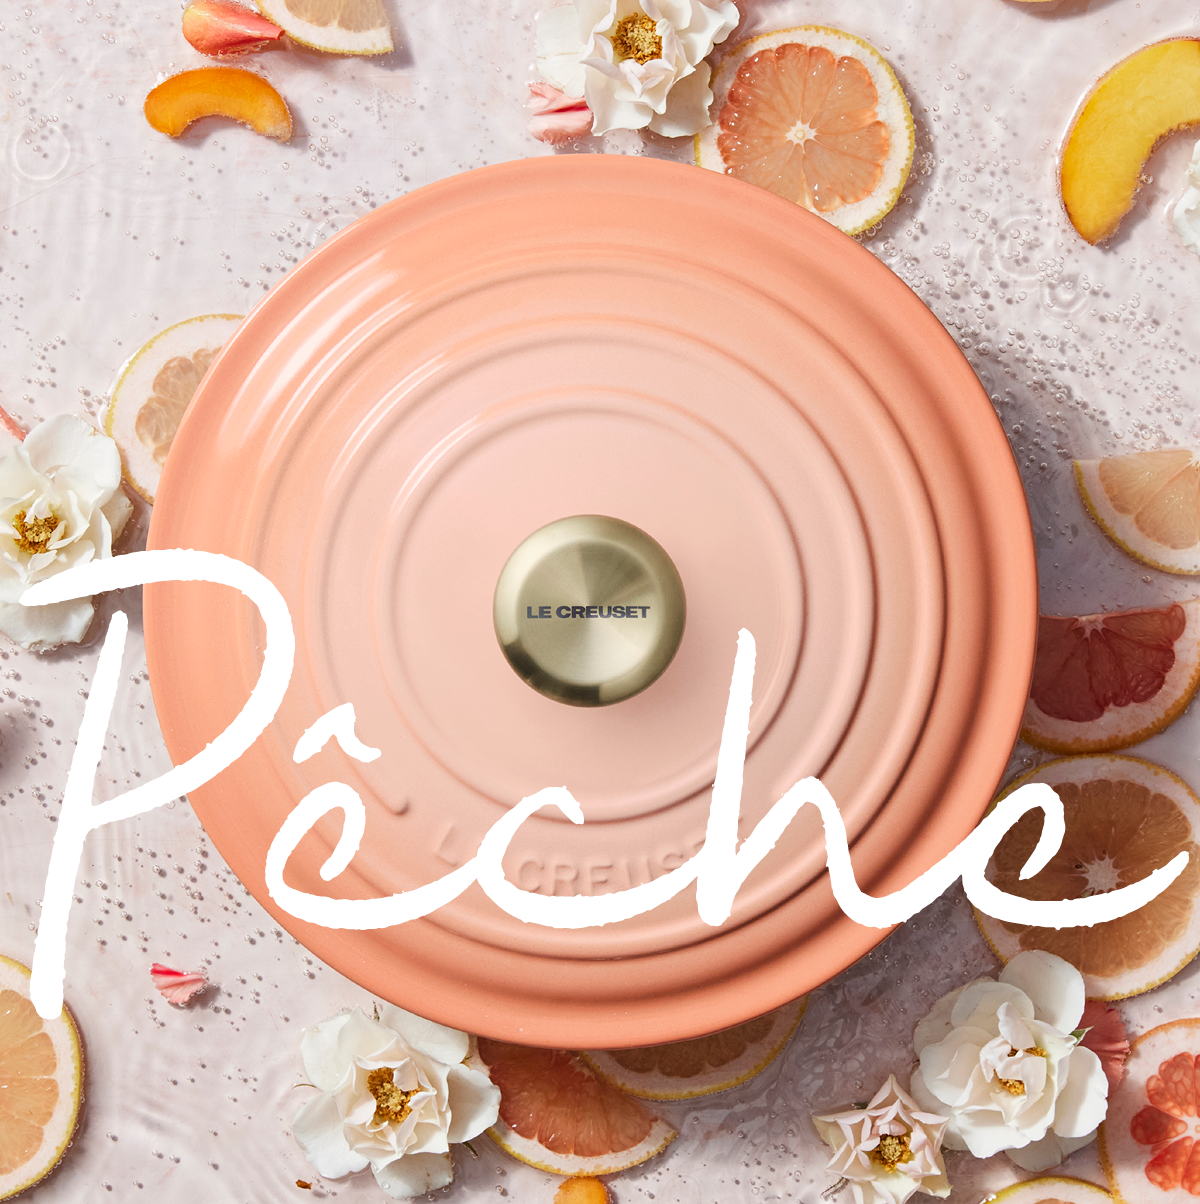 SAVE $150 on Le Creuset's NEW mom-approved color, Peche.